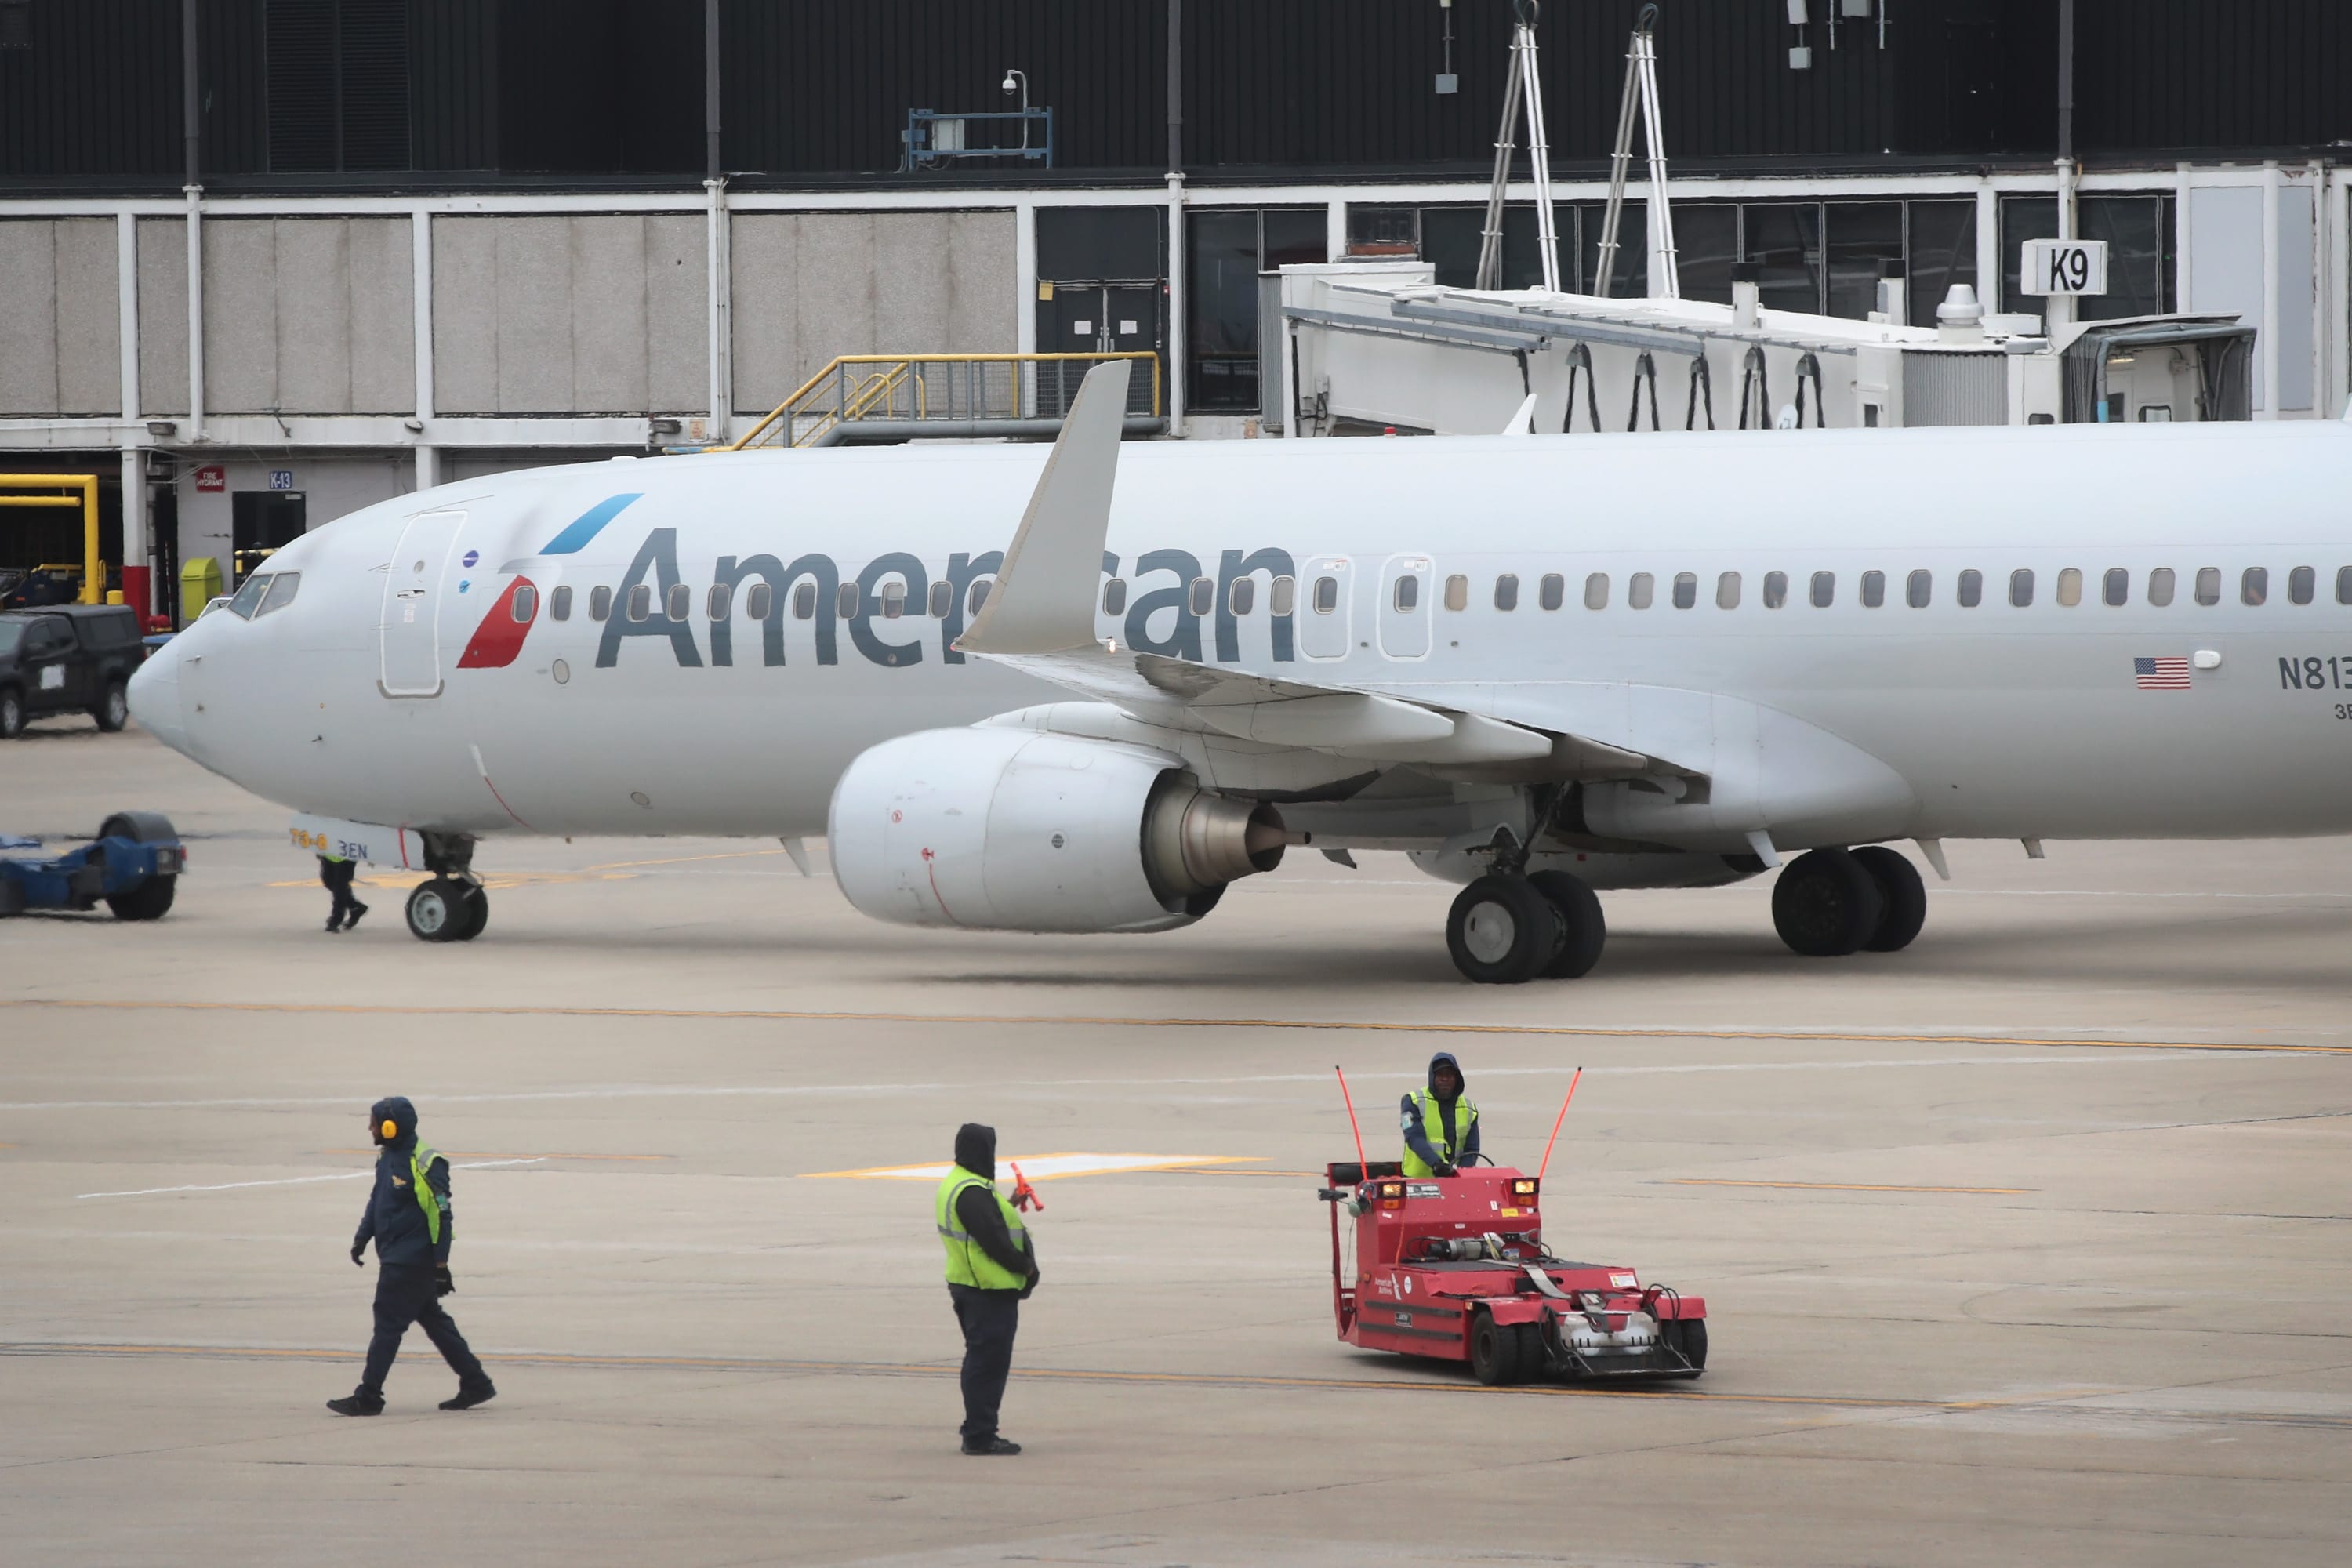 American delays plan to increase seating on planes amid 737 Max grounding